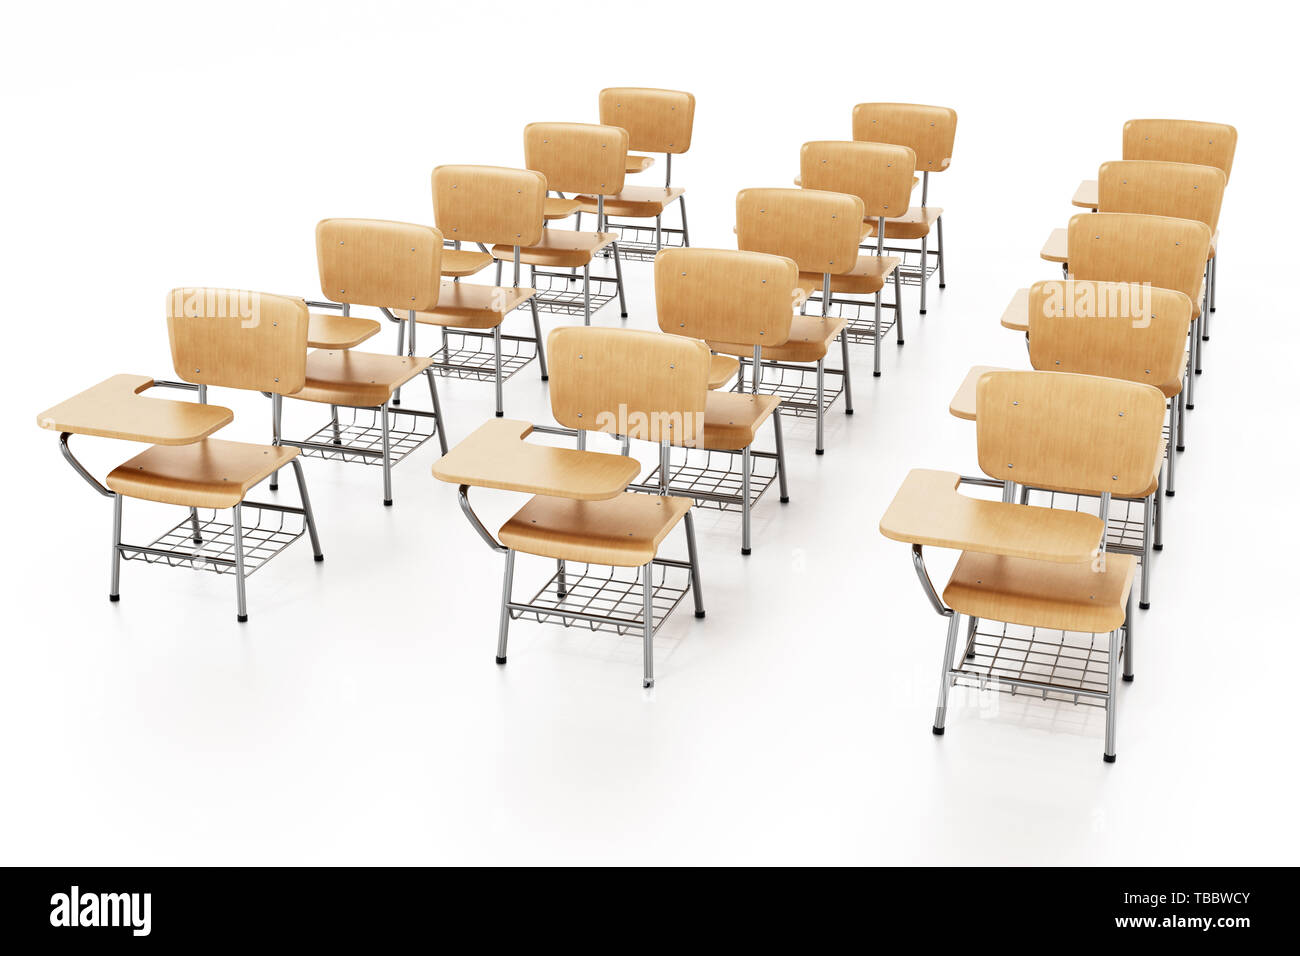 Student chairs isolated on white background. 3D illustration. Stock Photo